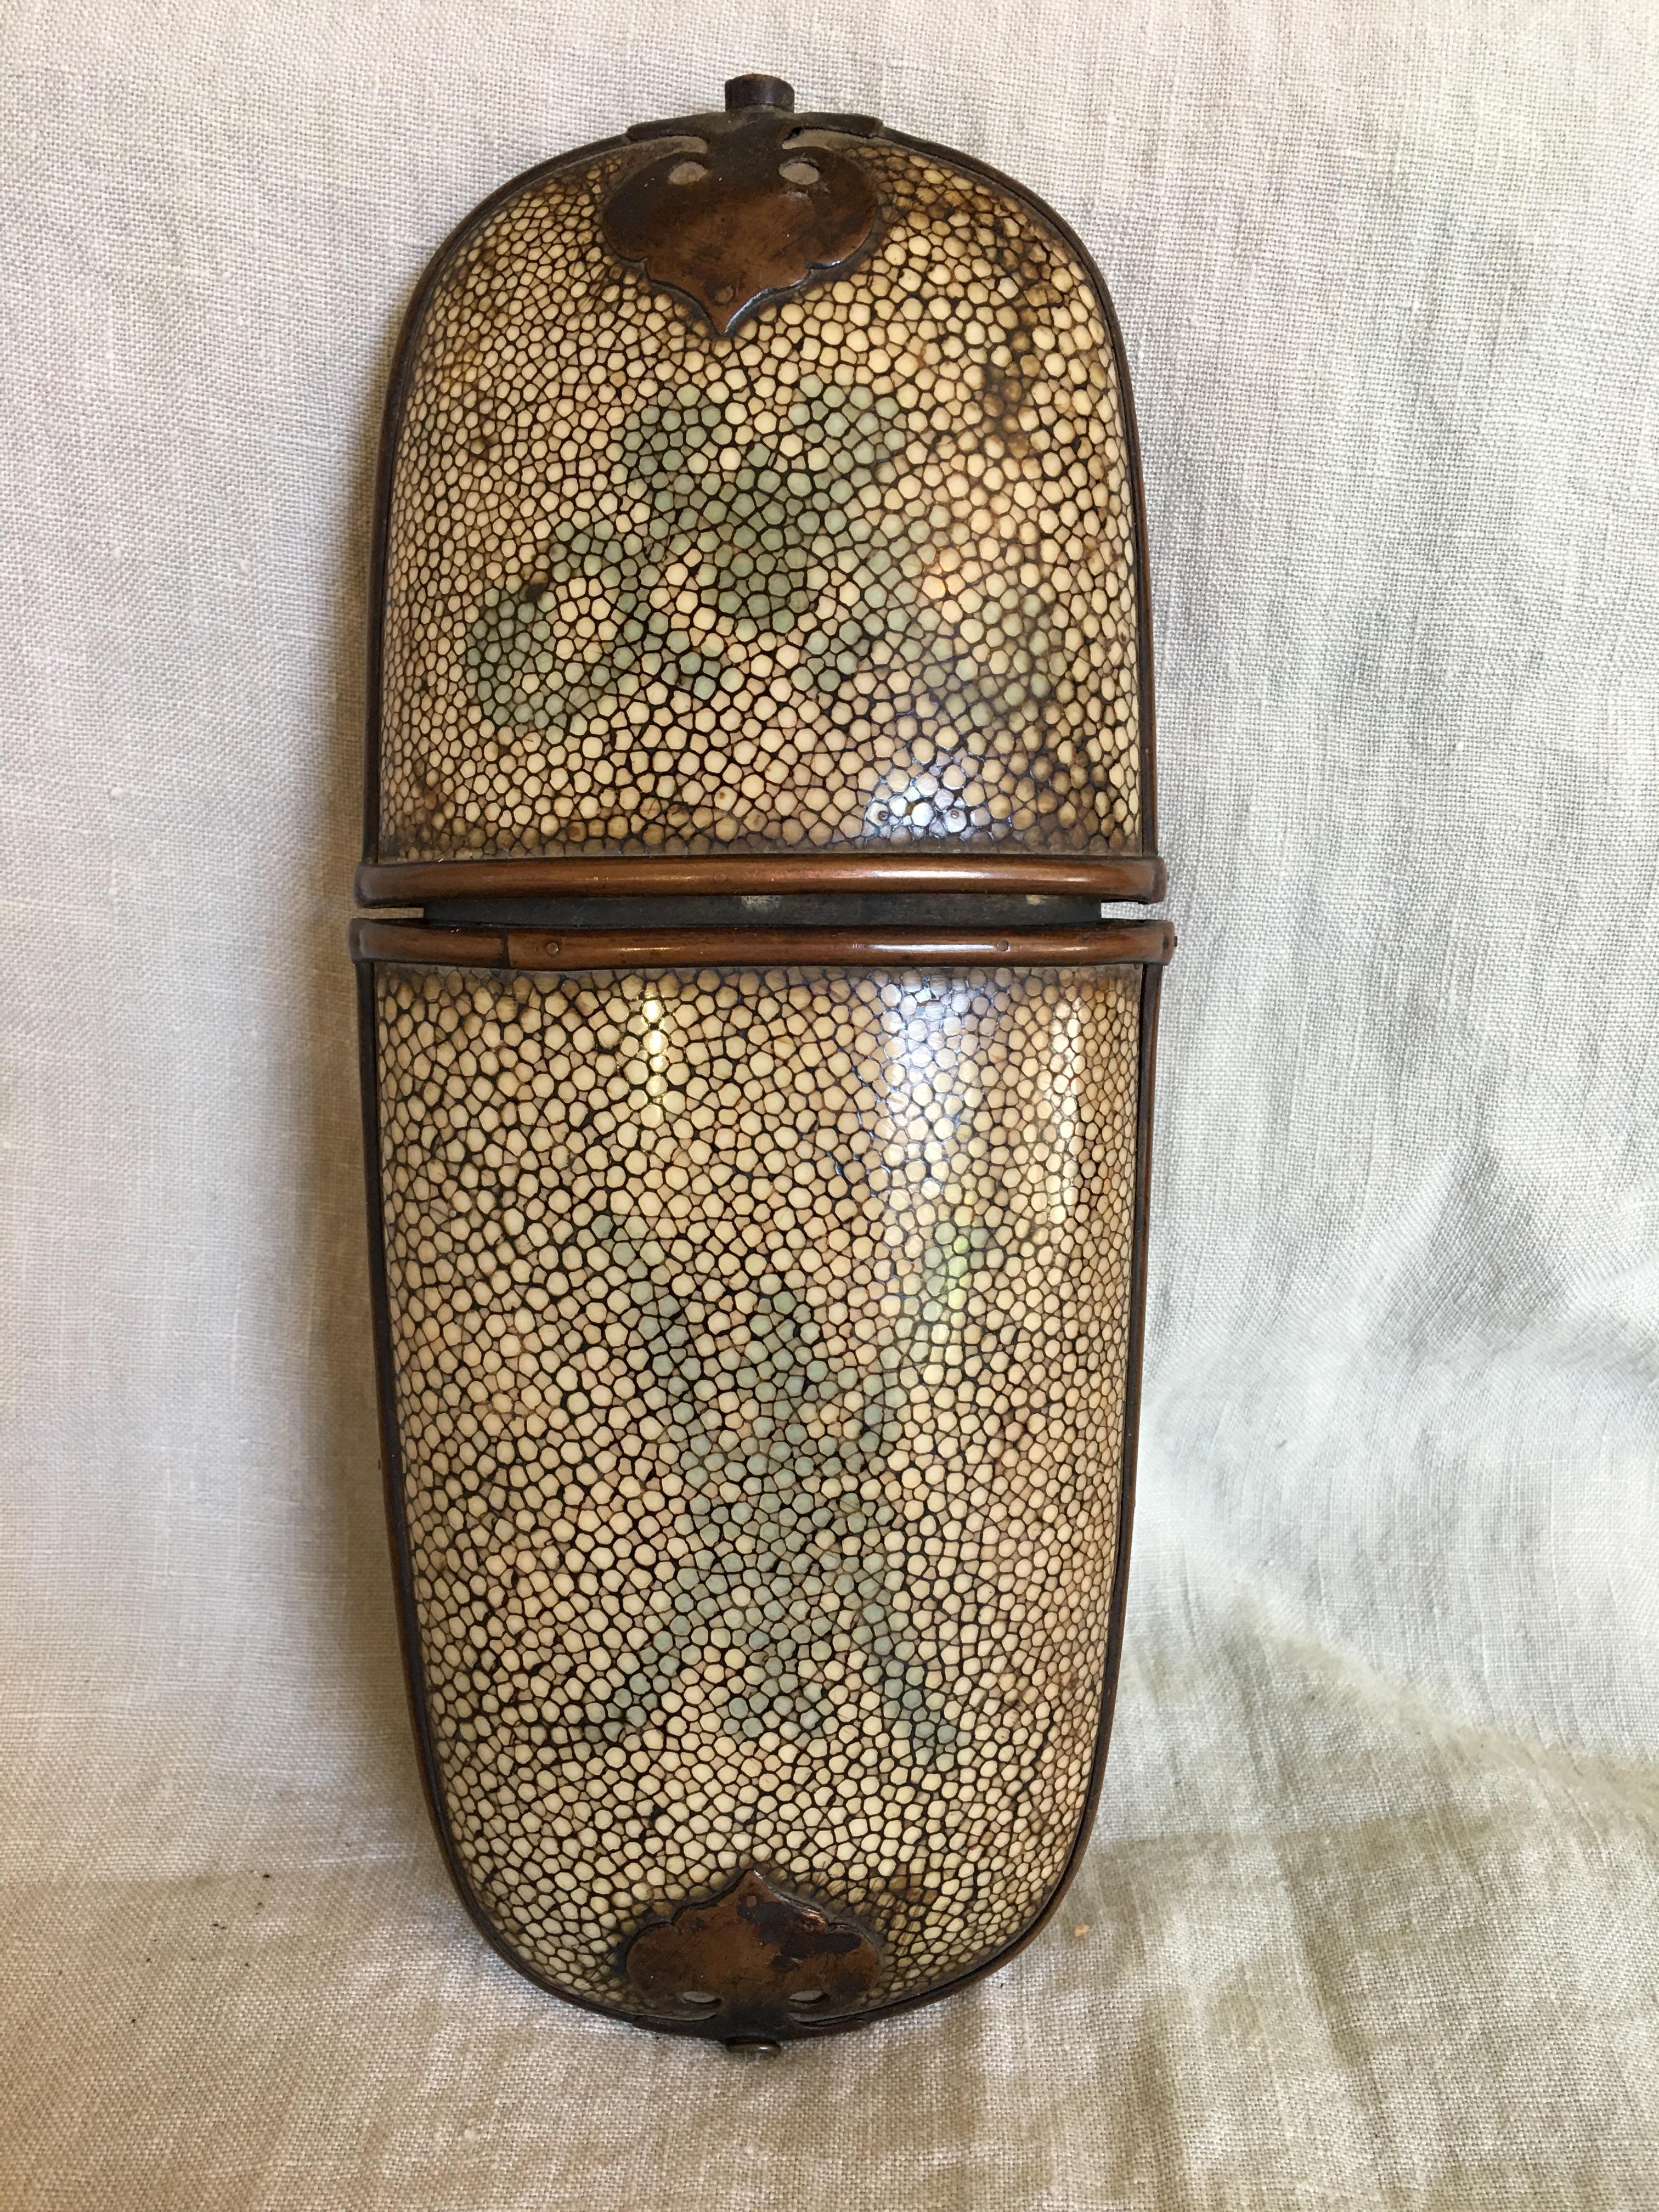 Chinese beige shagreen brass mounted eyeglass case, early 20th century.